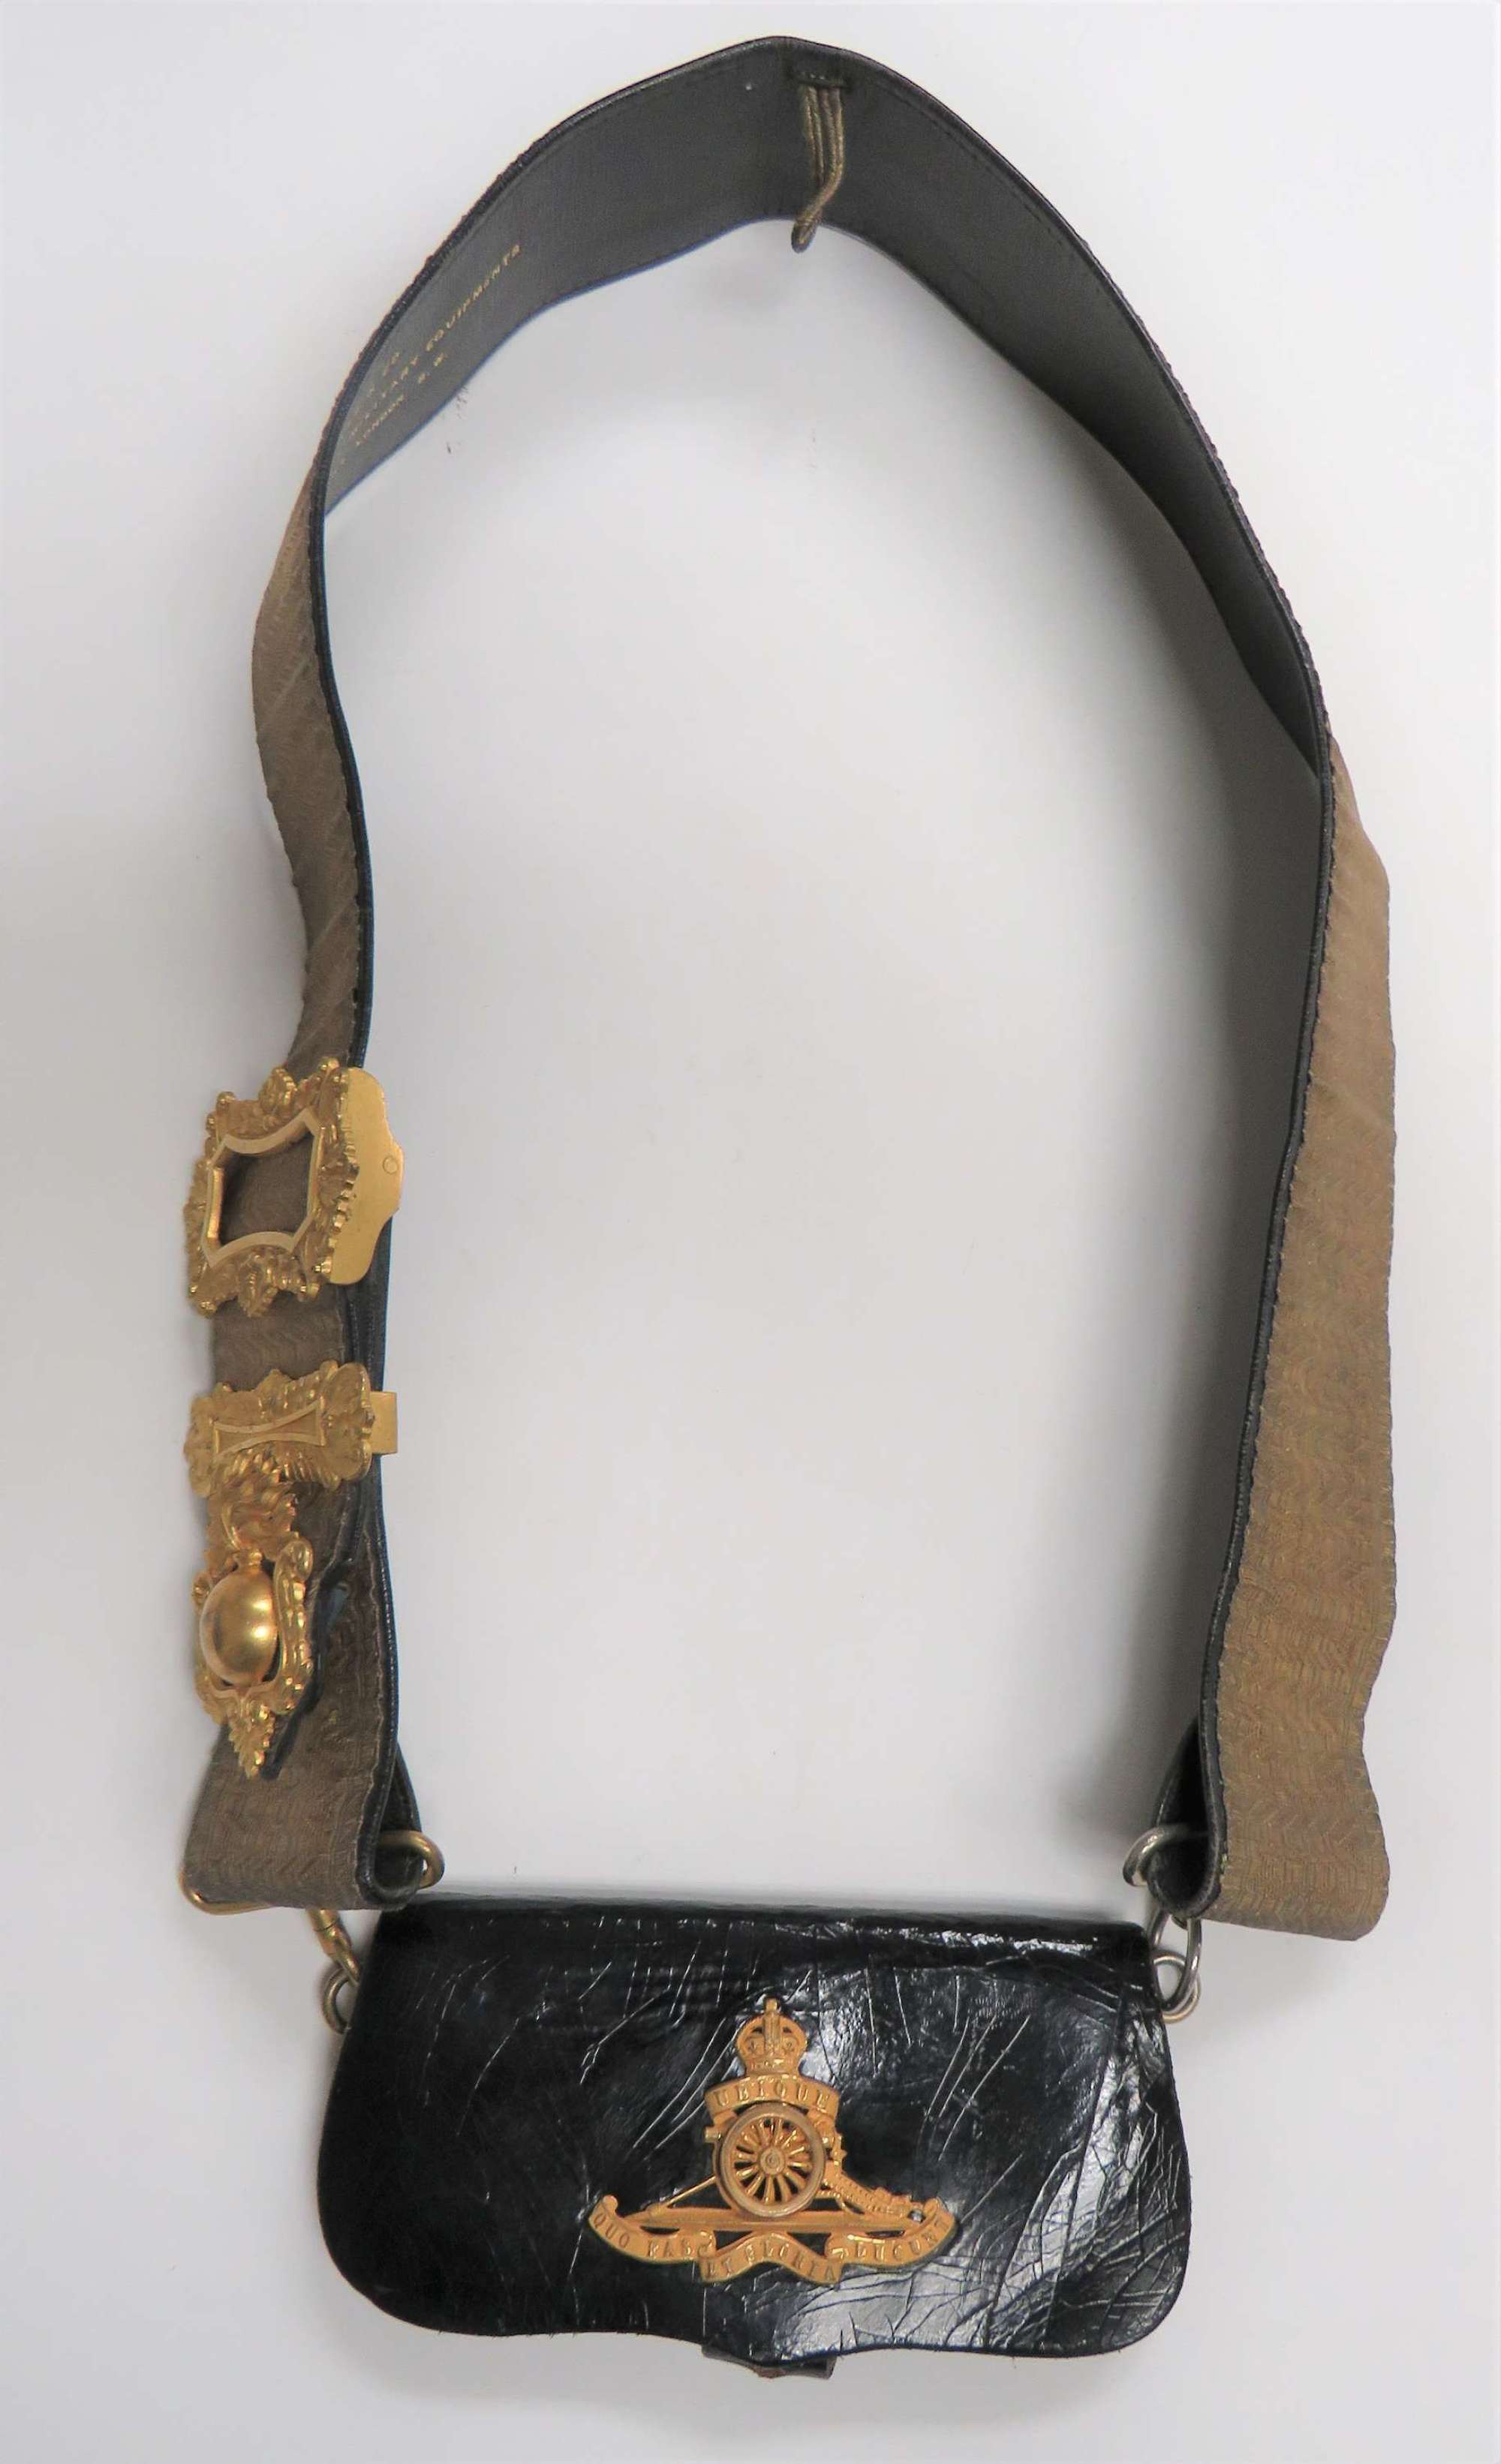 Post 1901 Kings Crown Officers Artillery Shoulder Strap and Pouch